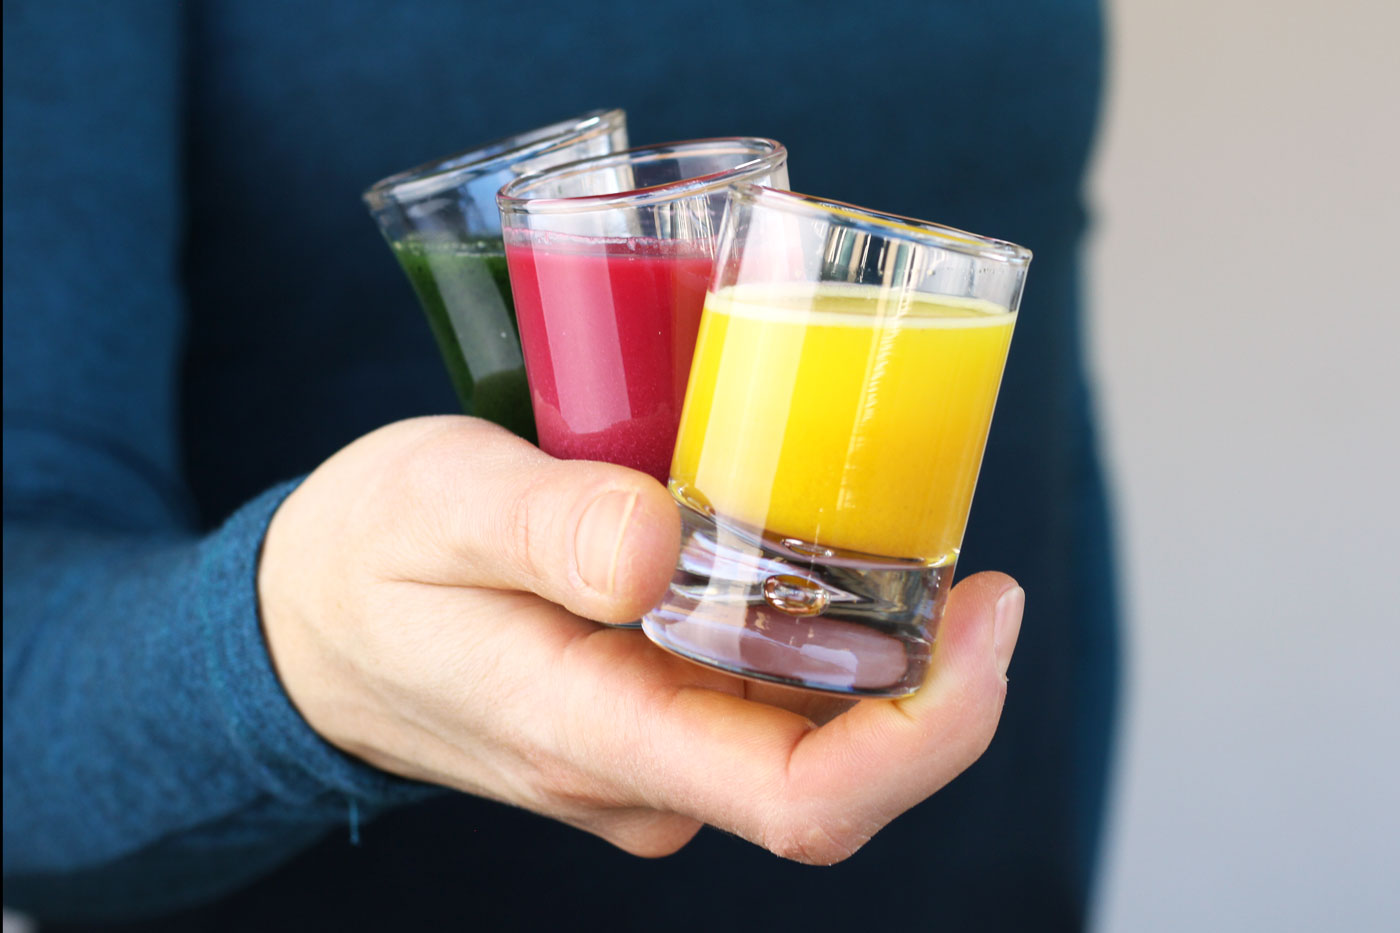 We are sharing with you three powerful homemade wellness shots to enhance your health and wellbeing.